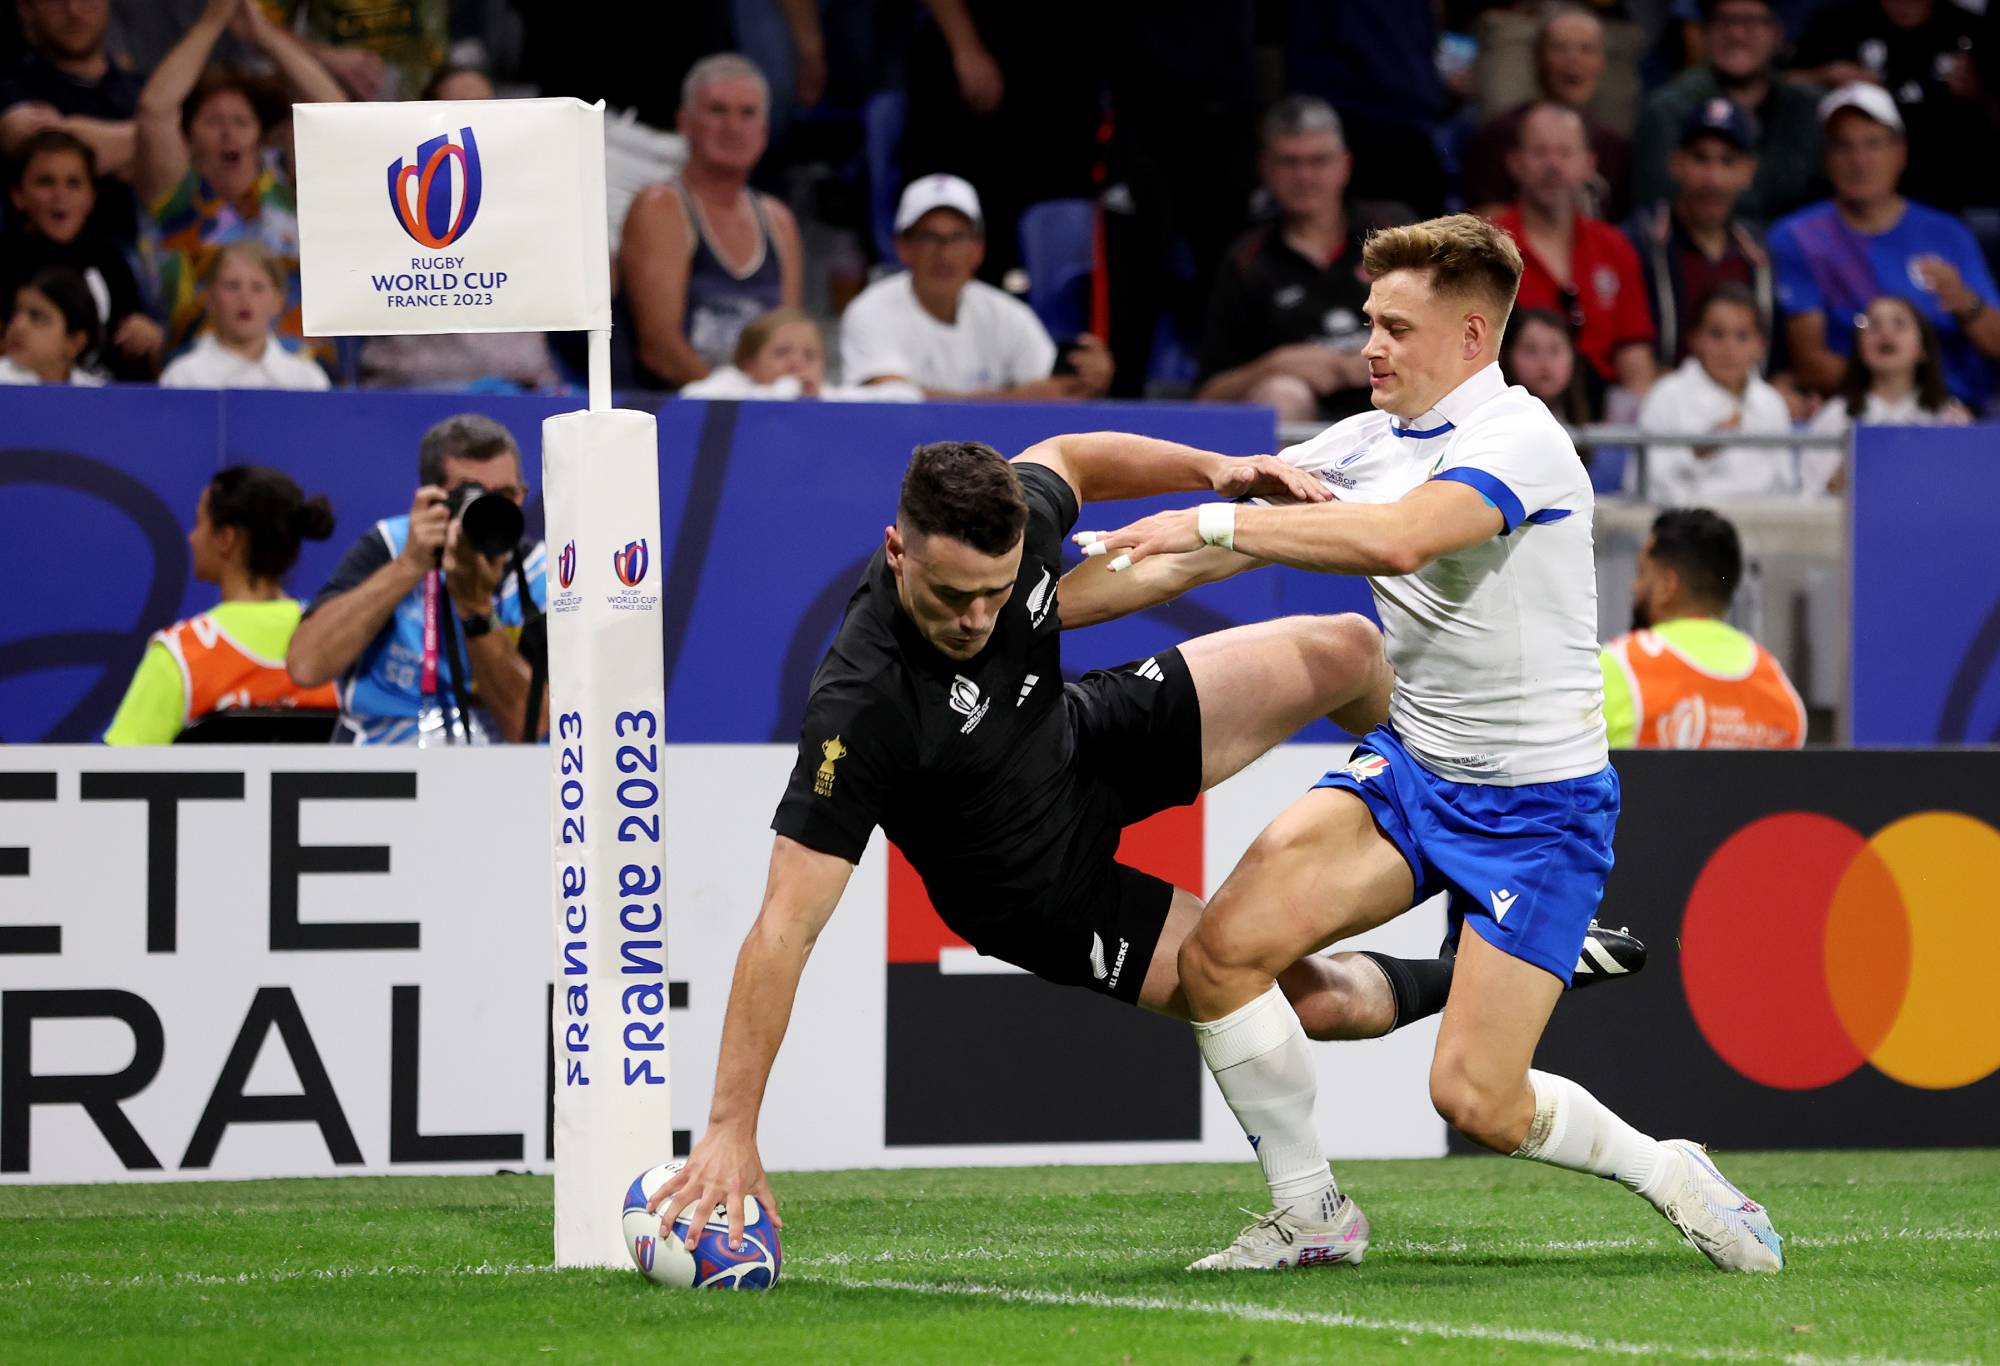 Will Jordan of New Zealand scores his team's first try during the Rugby World Cup France 2023 match between New Zealand and Italy at Parc Olympique on September 29, 2023 in Lyon, France. (Photo by Chris Hyde/Getty Images)